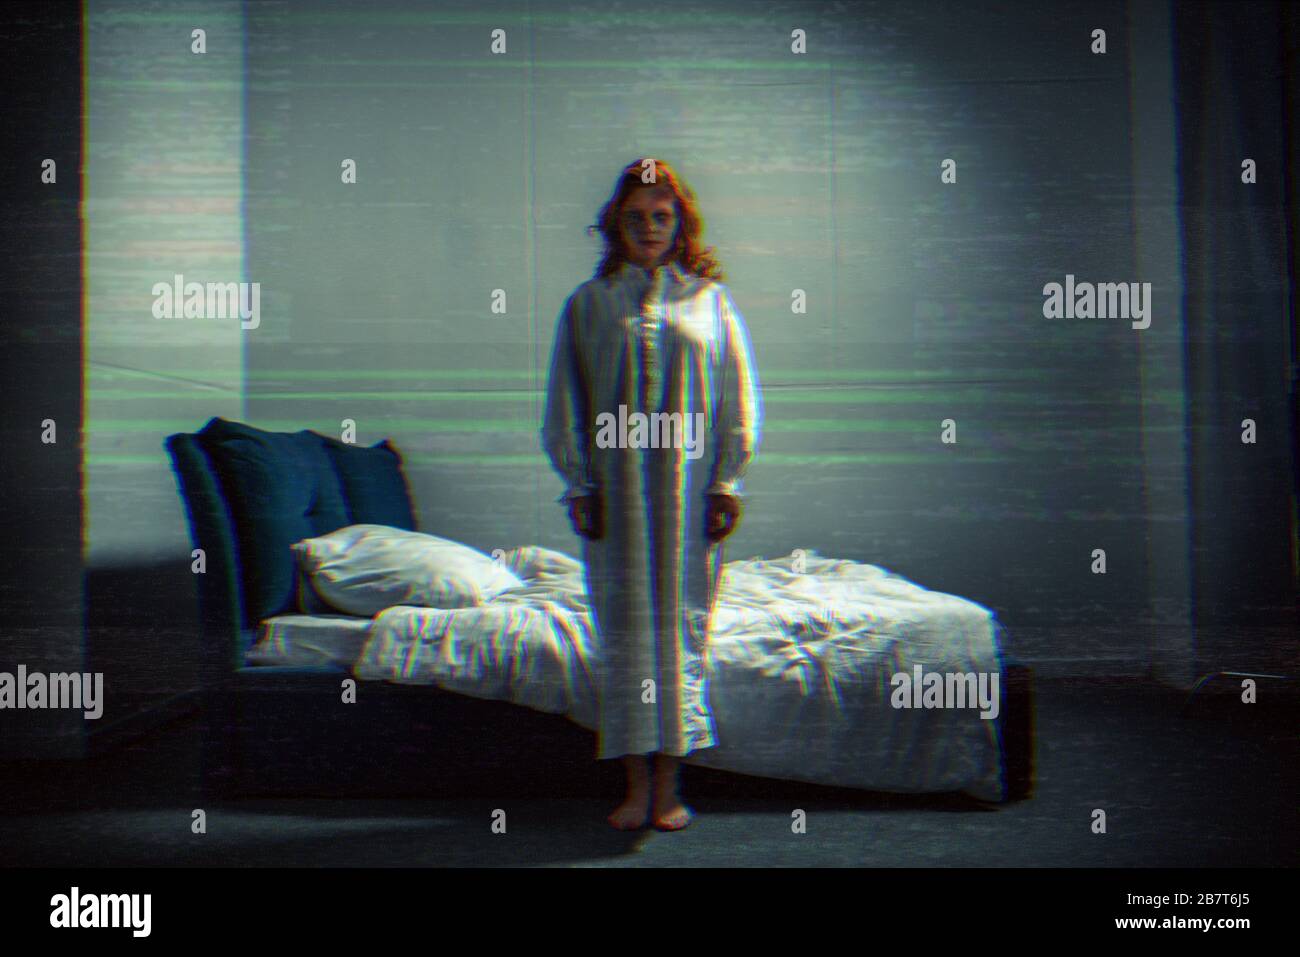 creepy demoniacal girl in nightgown standing in bedroom with tv noise Stock Photo